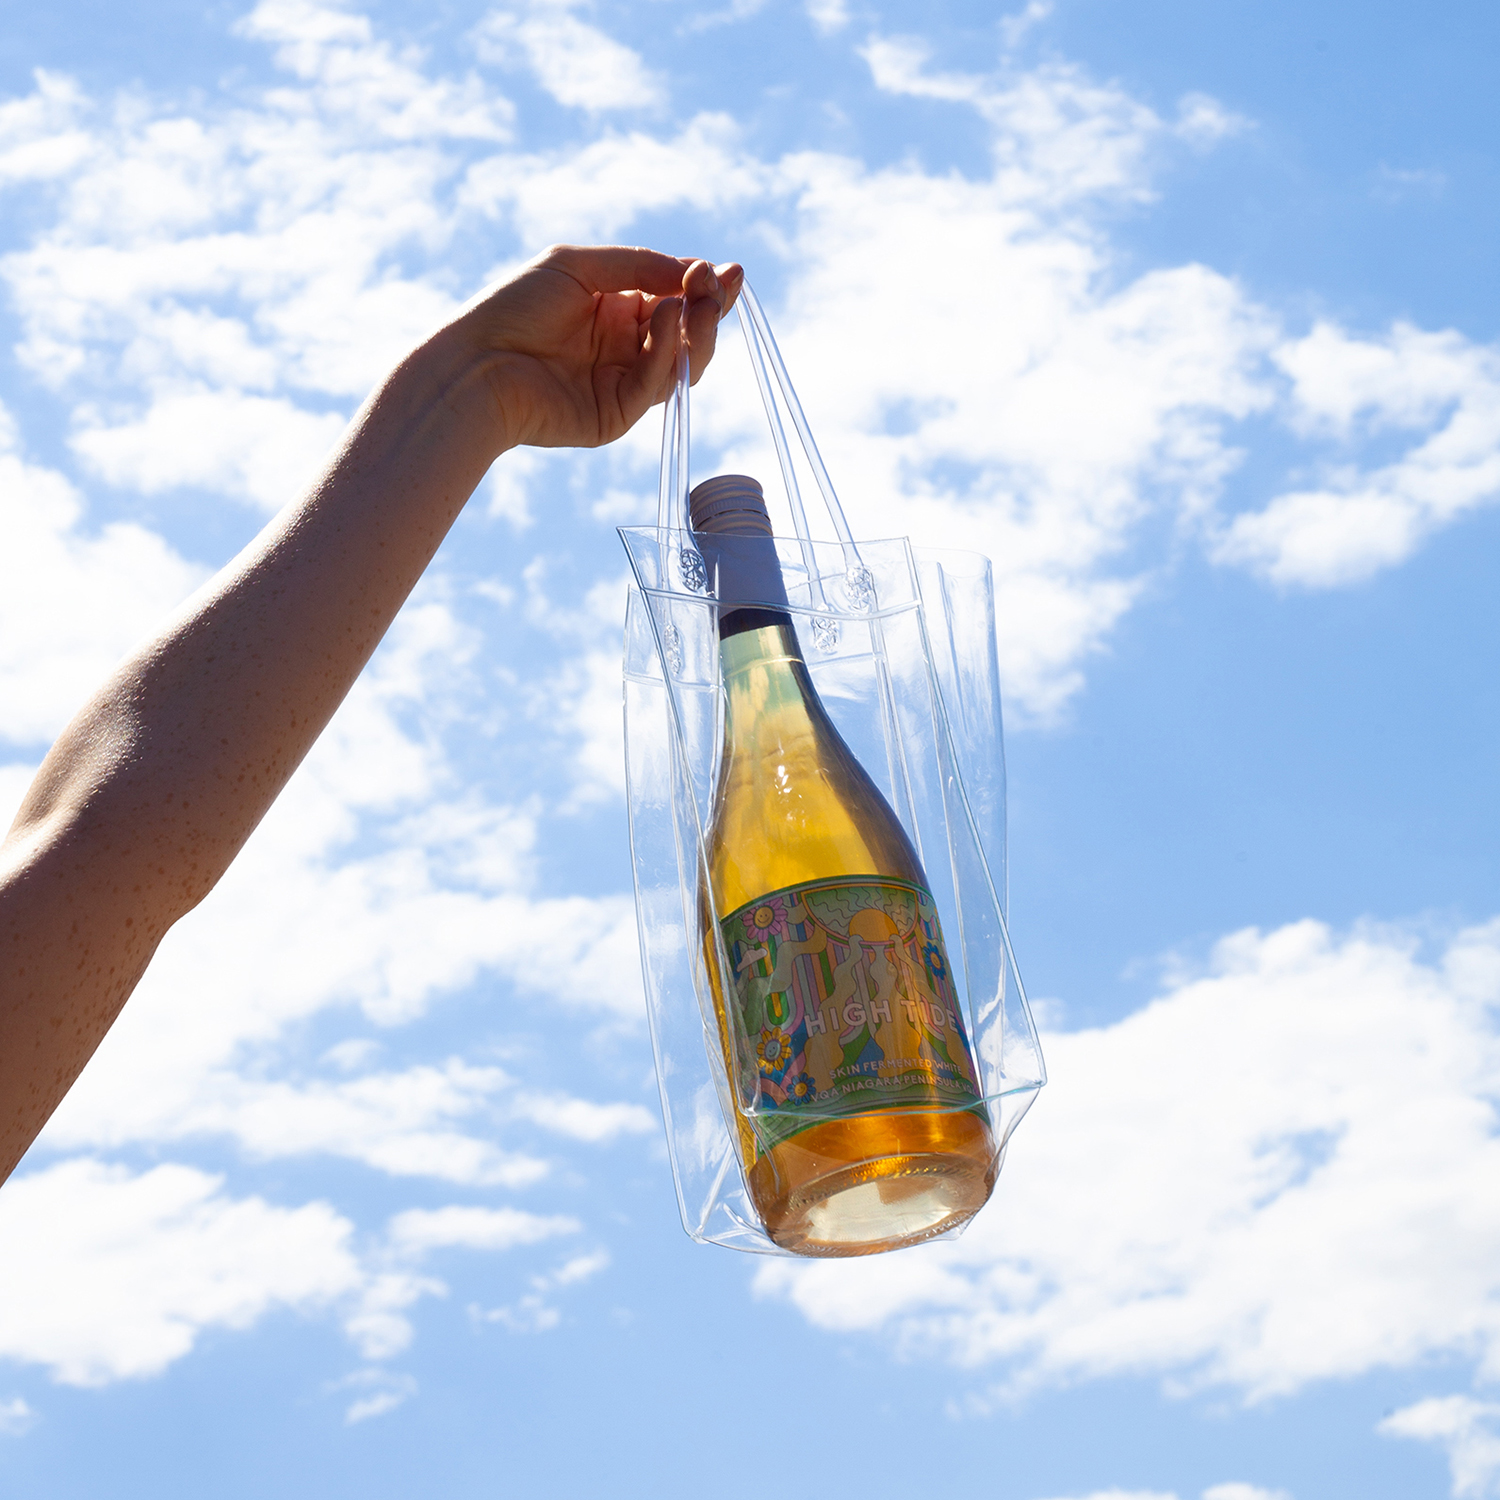 High Tide Wine Label in plastic bag against blue sky with white clouds. Photo by Ray Tran.